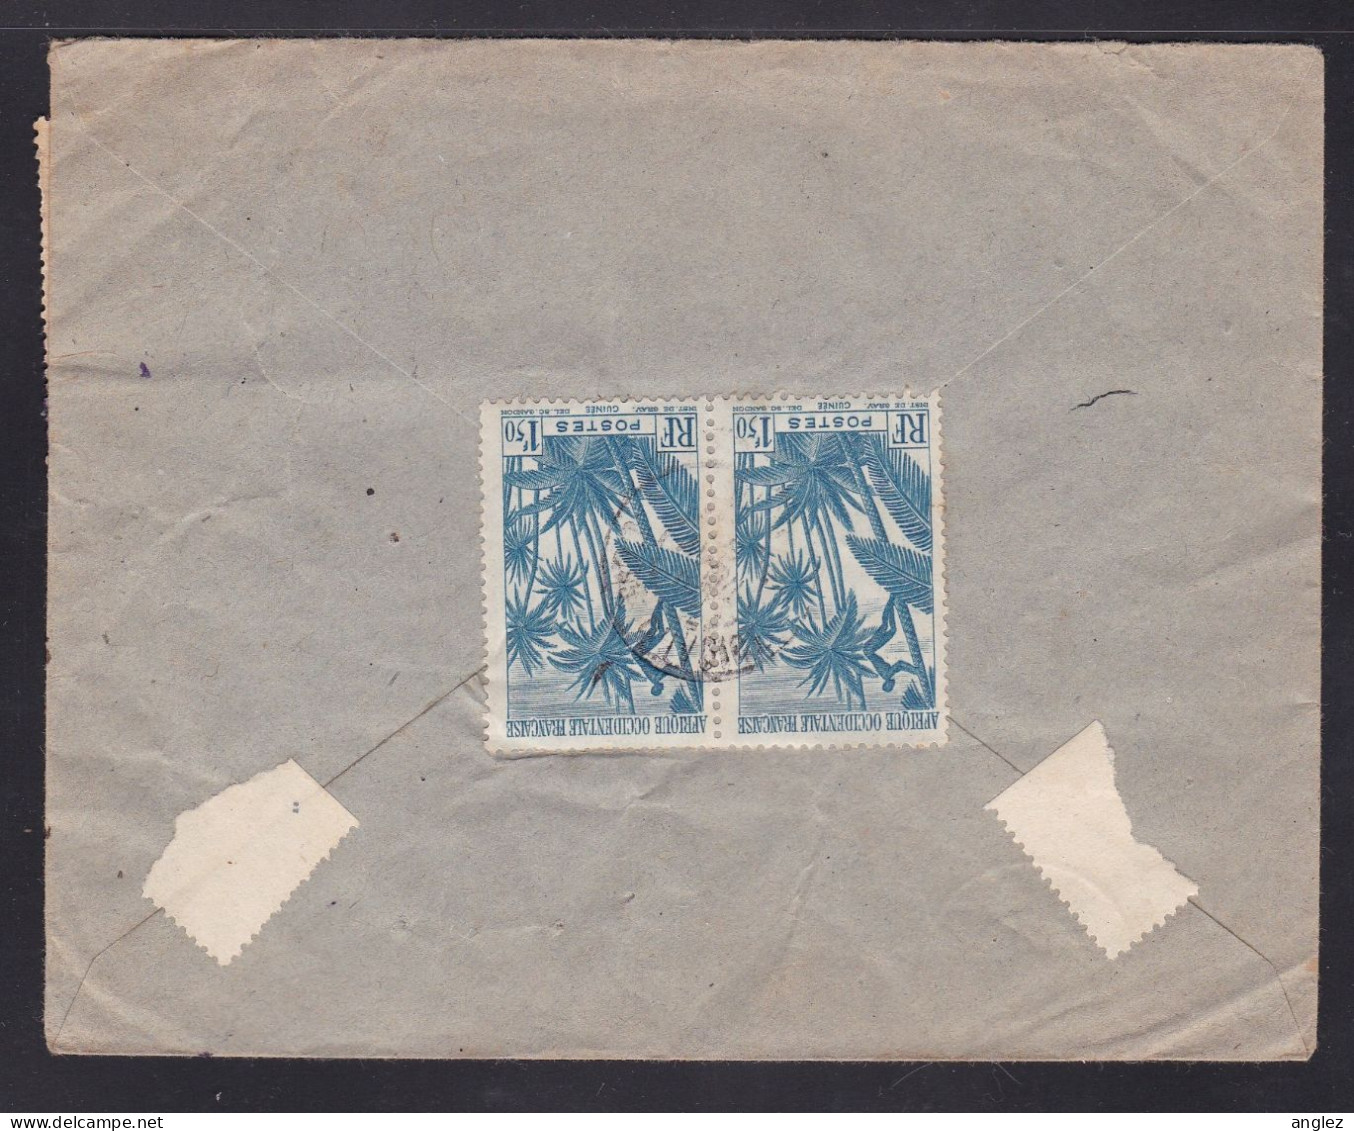 France / AOF / Cote D'Ivoire / Ivory Coast - 1950 Airmail Cover Divo To Chicago USA - Briefe U. Dokumente